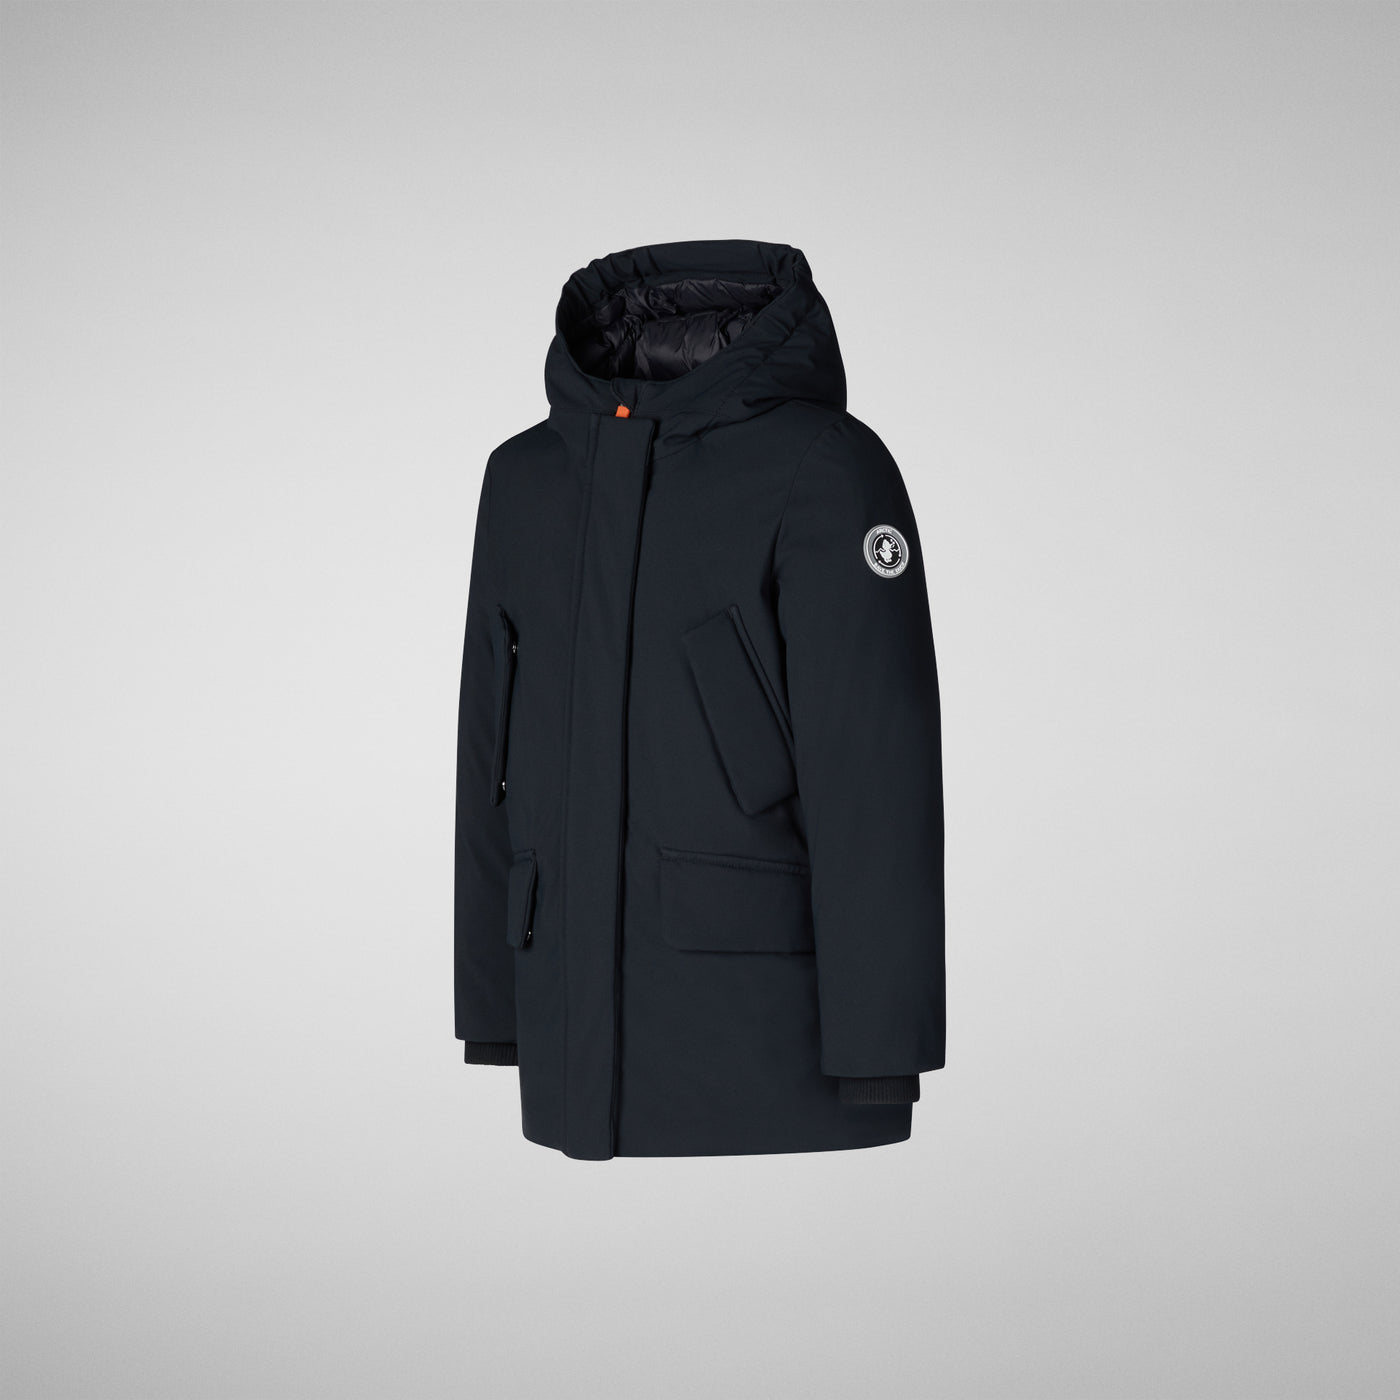 Product Side View of Girls' Ally Hooded Parka in Black